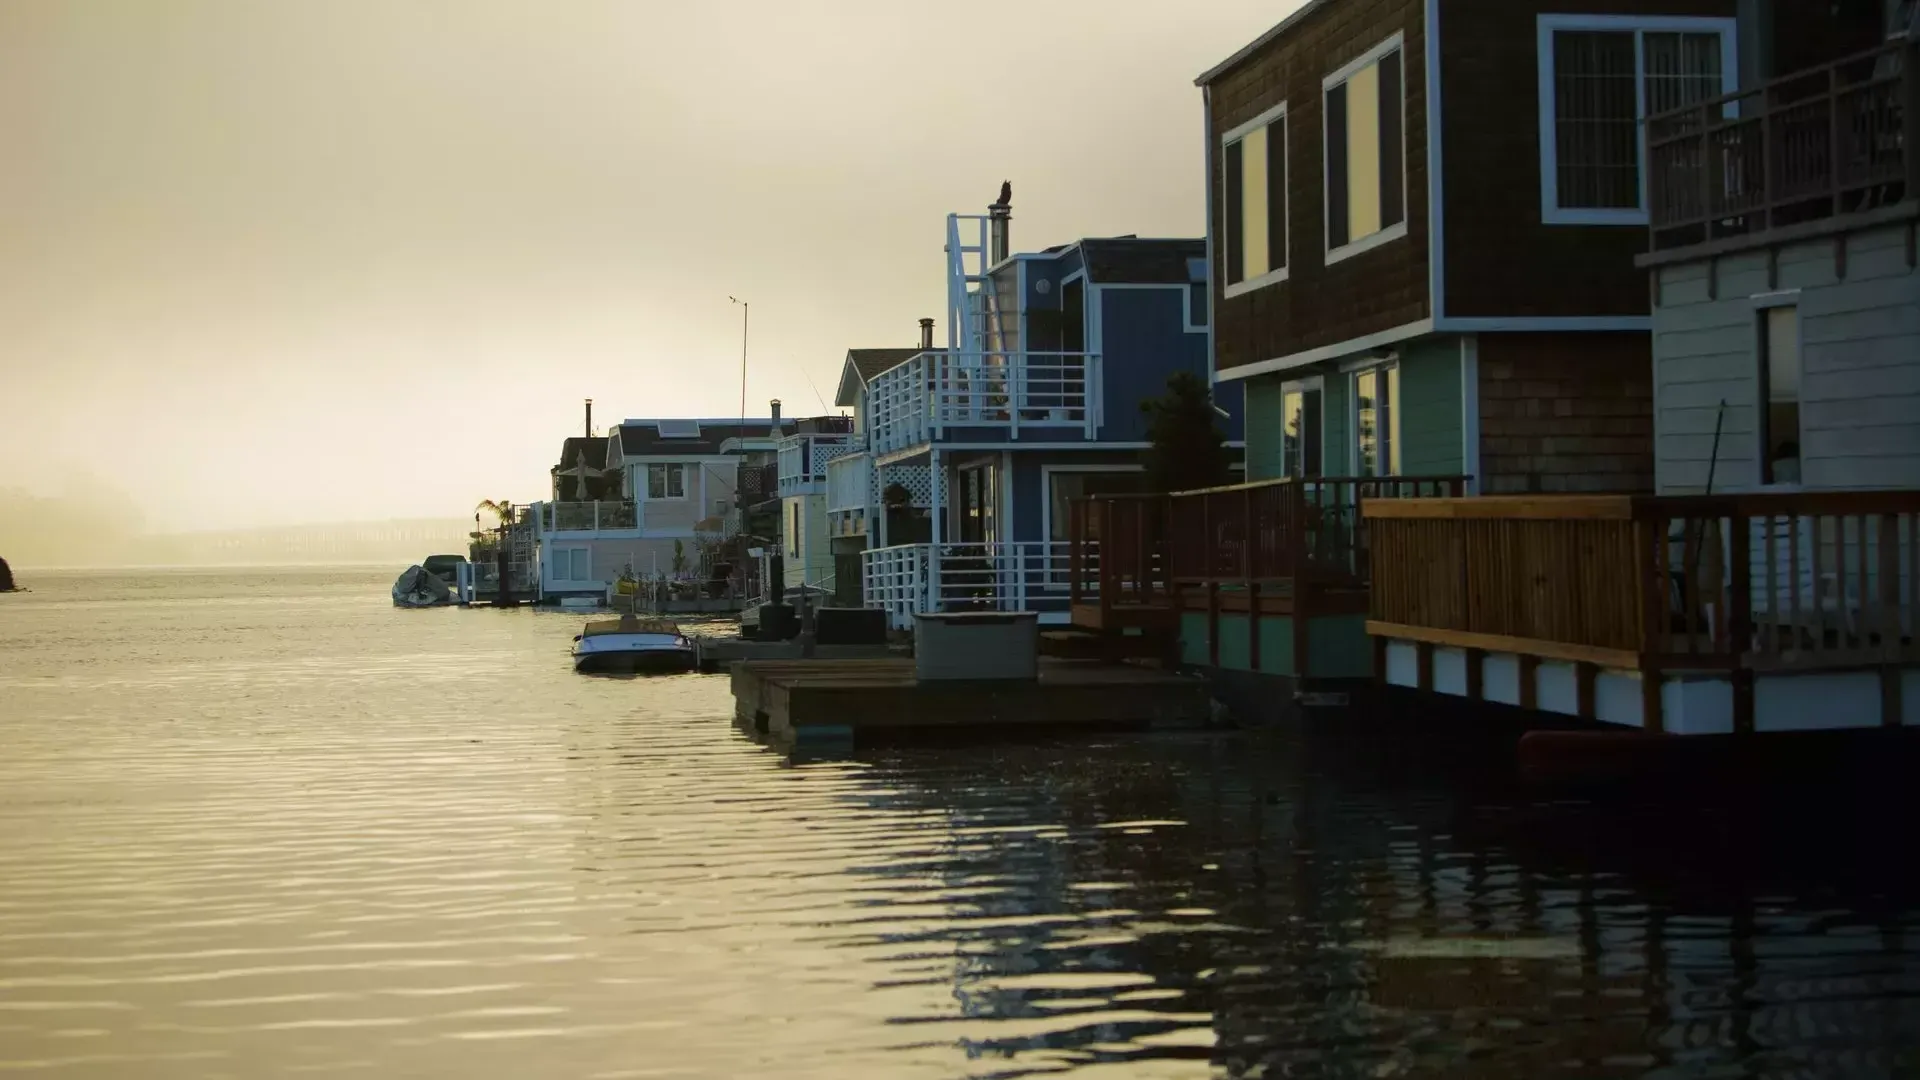 Houseboats in Sausalito.